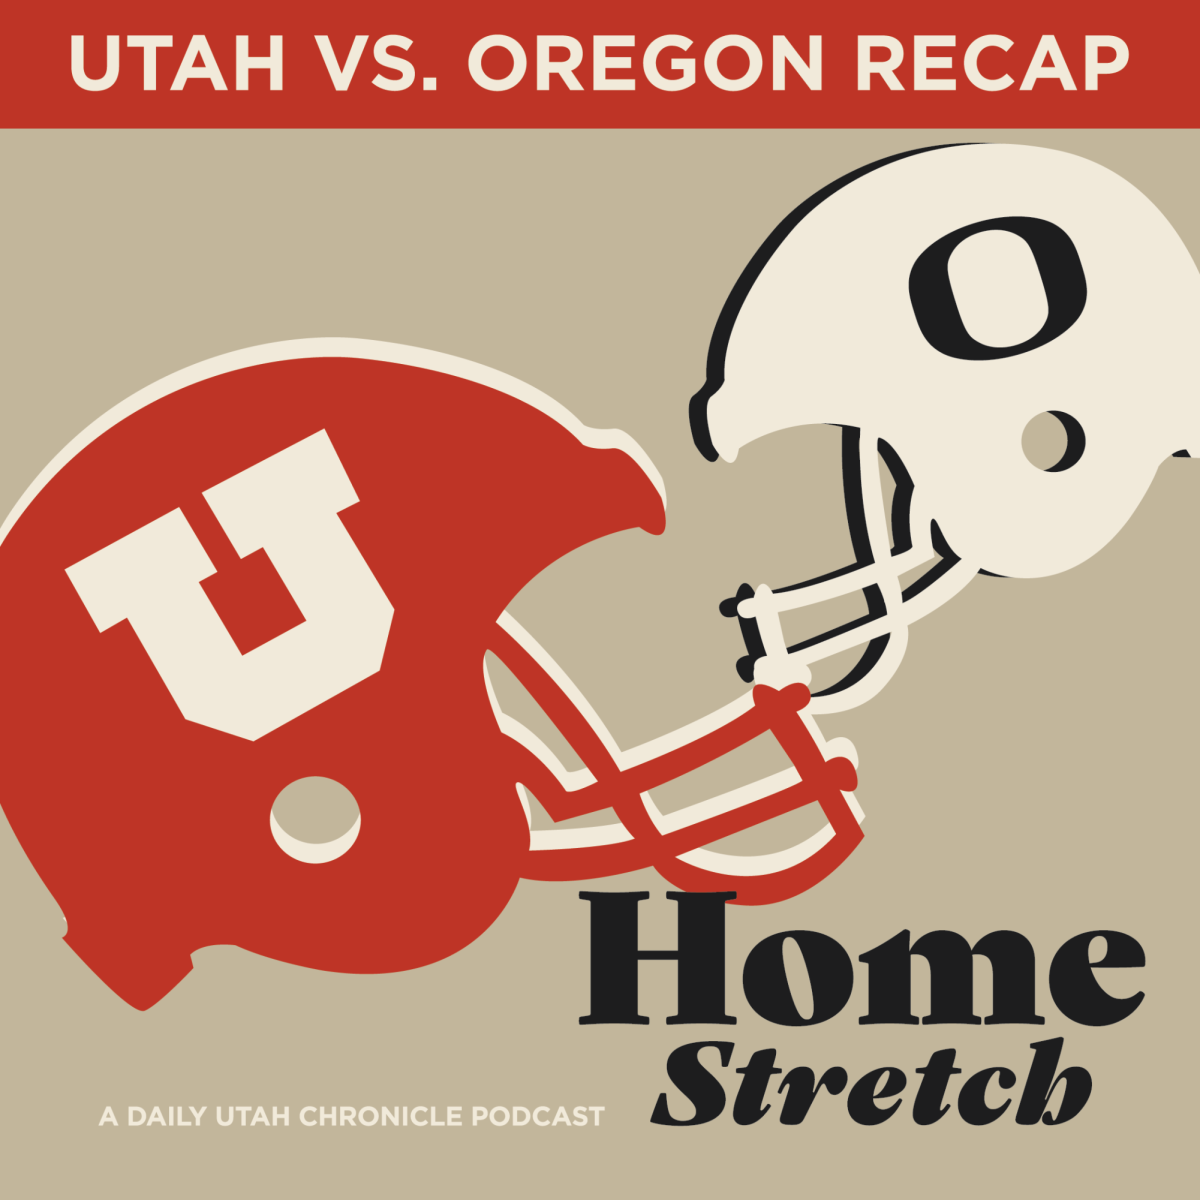 (Design by Mary Allen | The Daily Utah Chronicle)